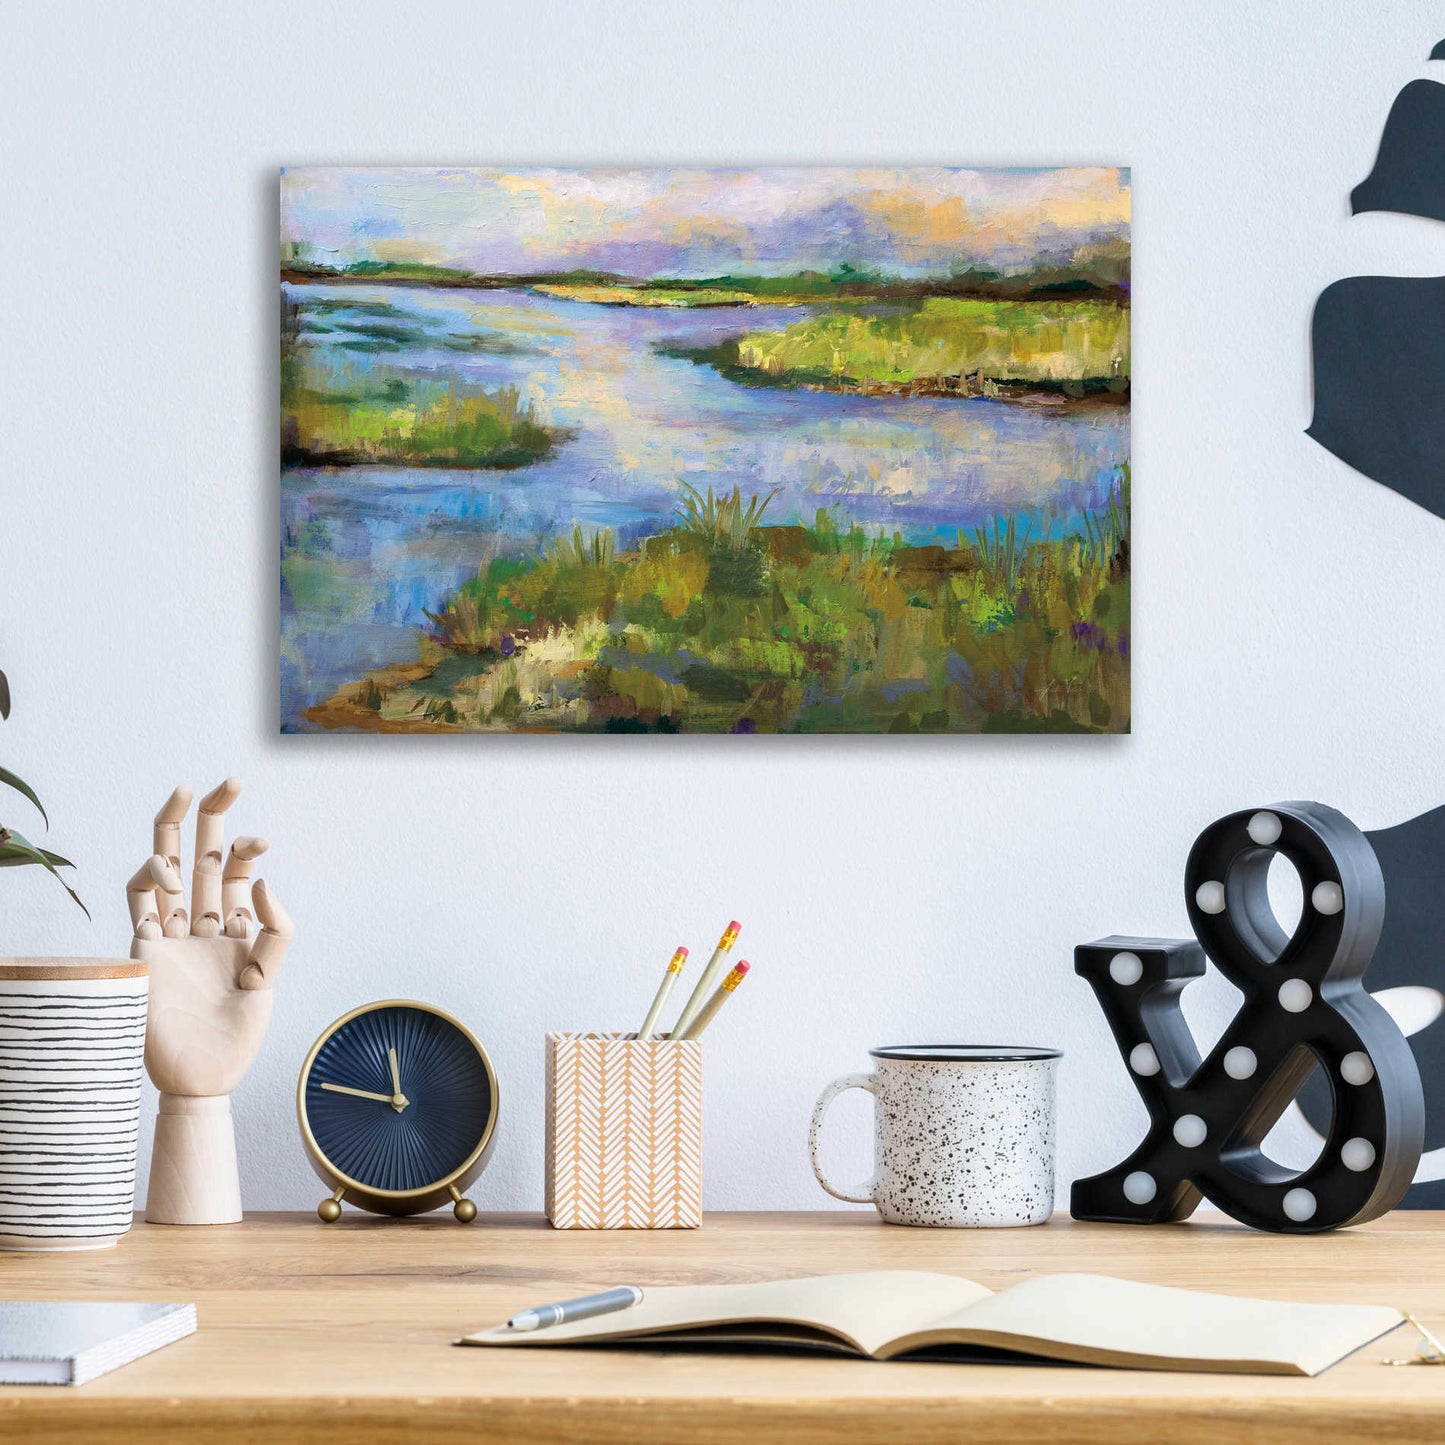 Epic Art 'Connecticut Marsh' by Jeanette Vertentes, Acrylic Glass Wall Art,16x12